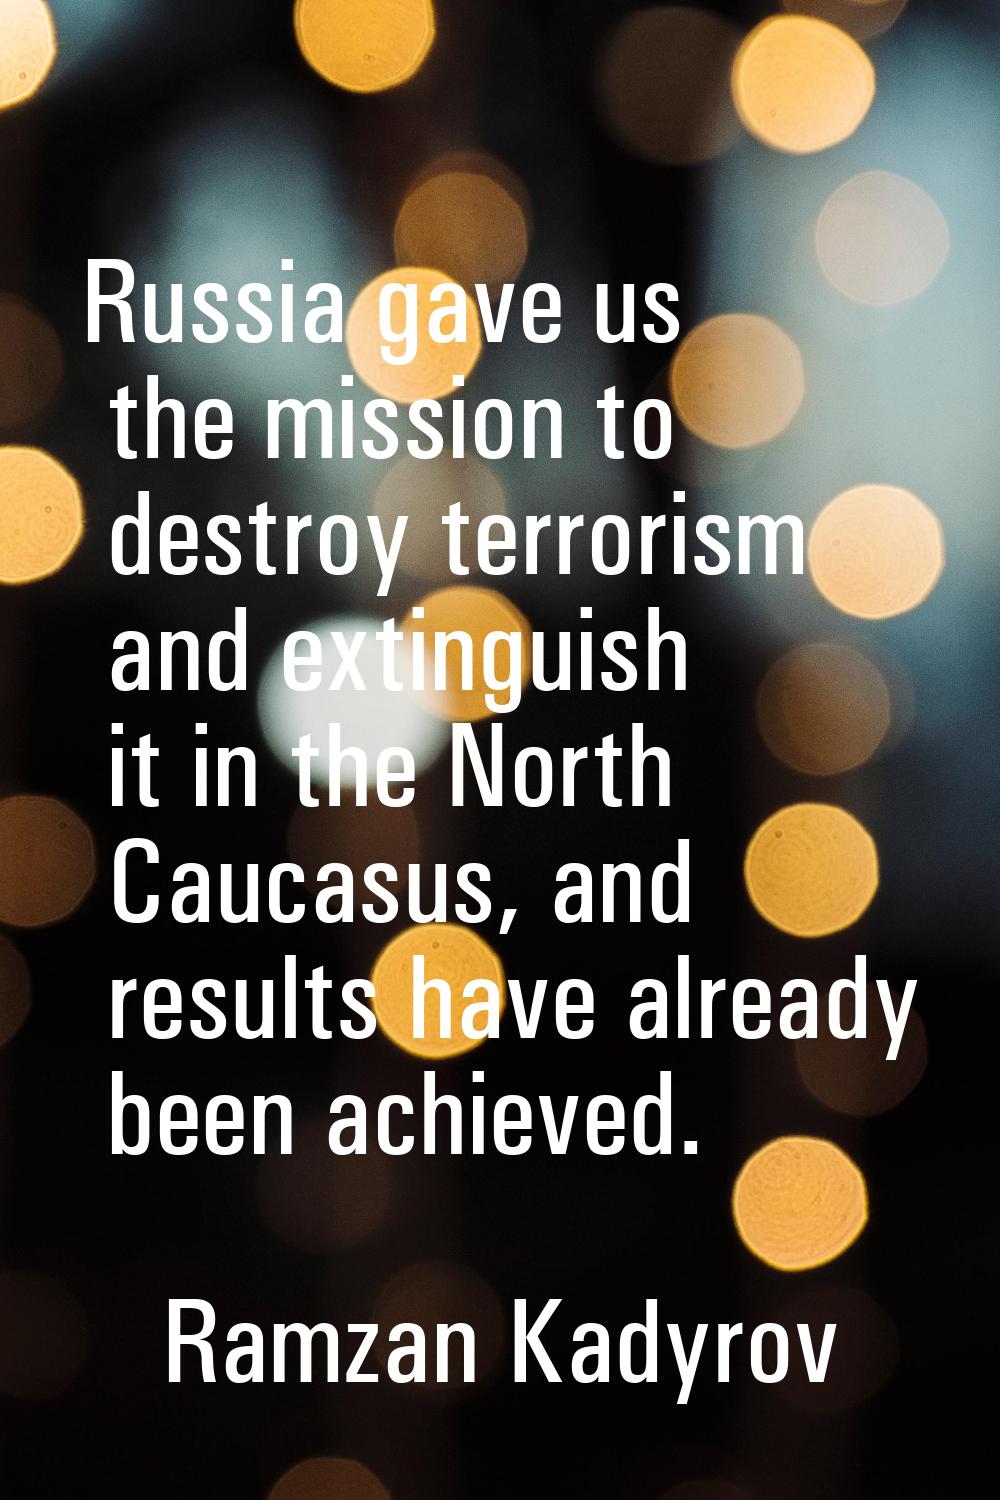 Russia gave us the mission to destroy terrorism and extinguish it in the North Caucasus, and result